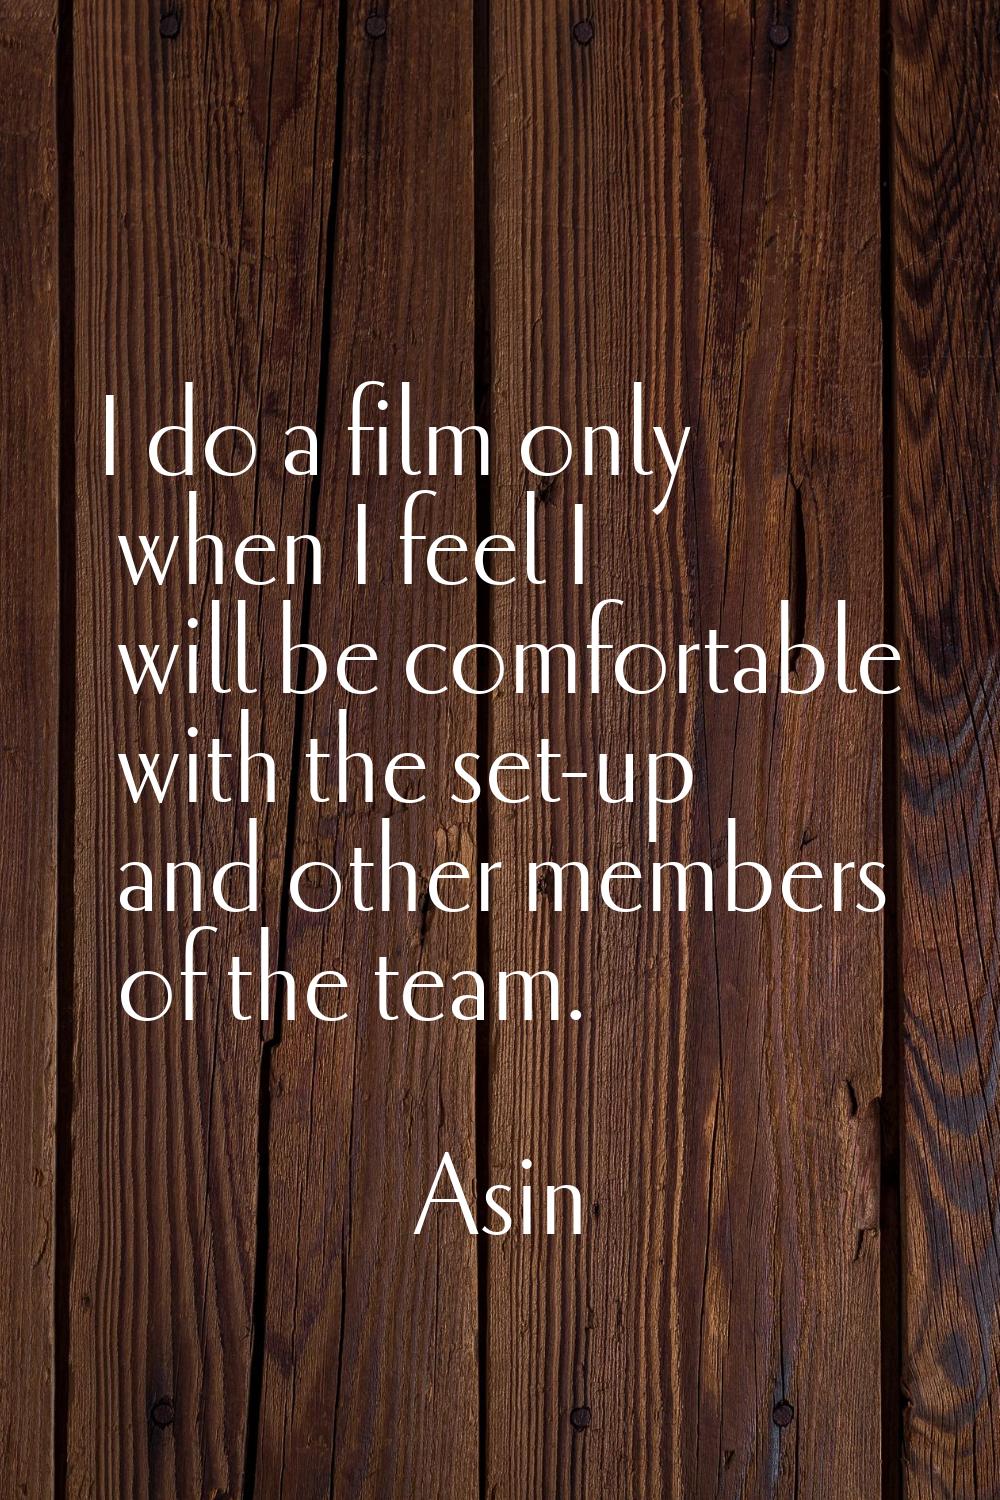 I do a film only when I feel I will be comfortable with the set-up and other members of the team.